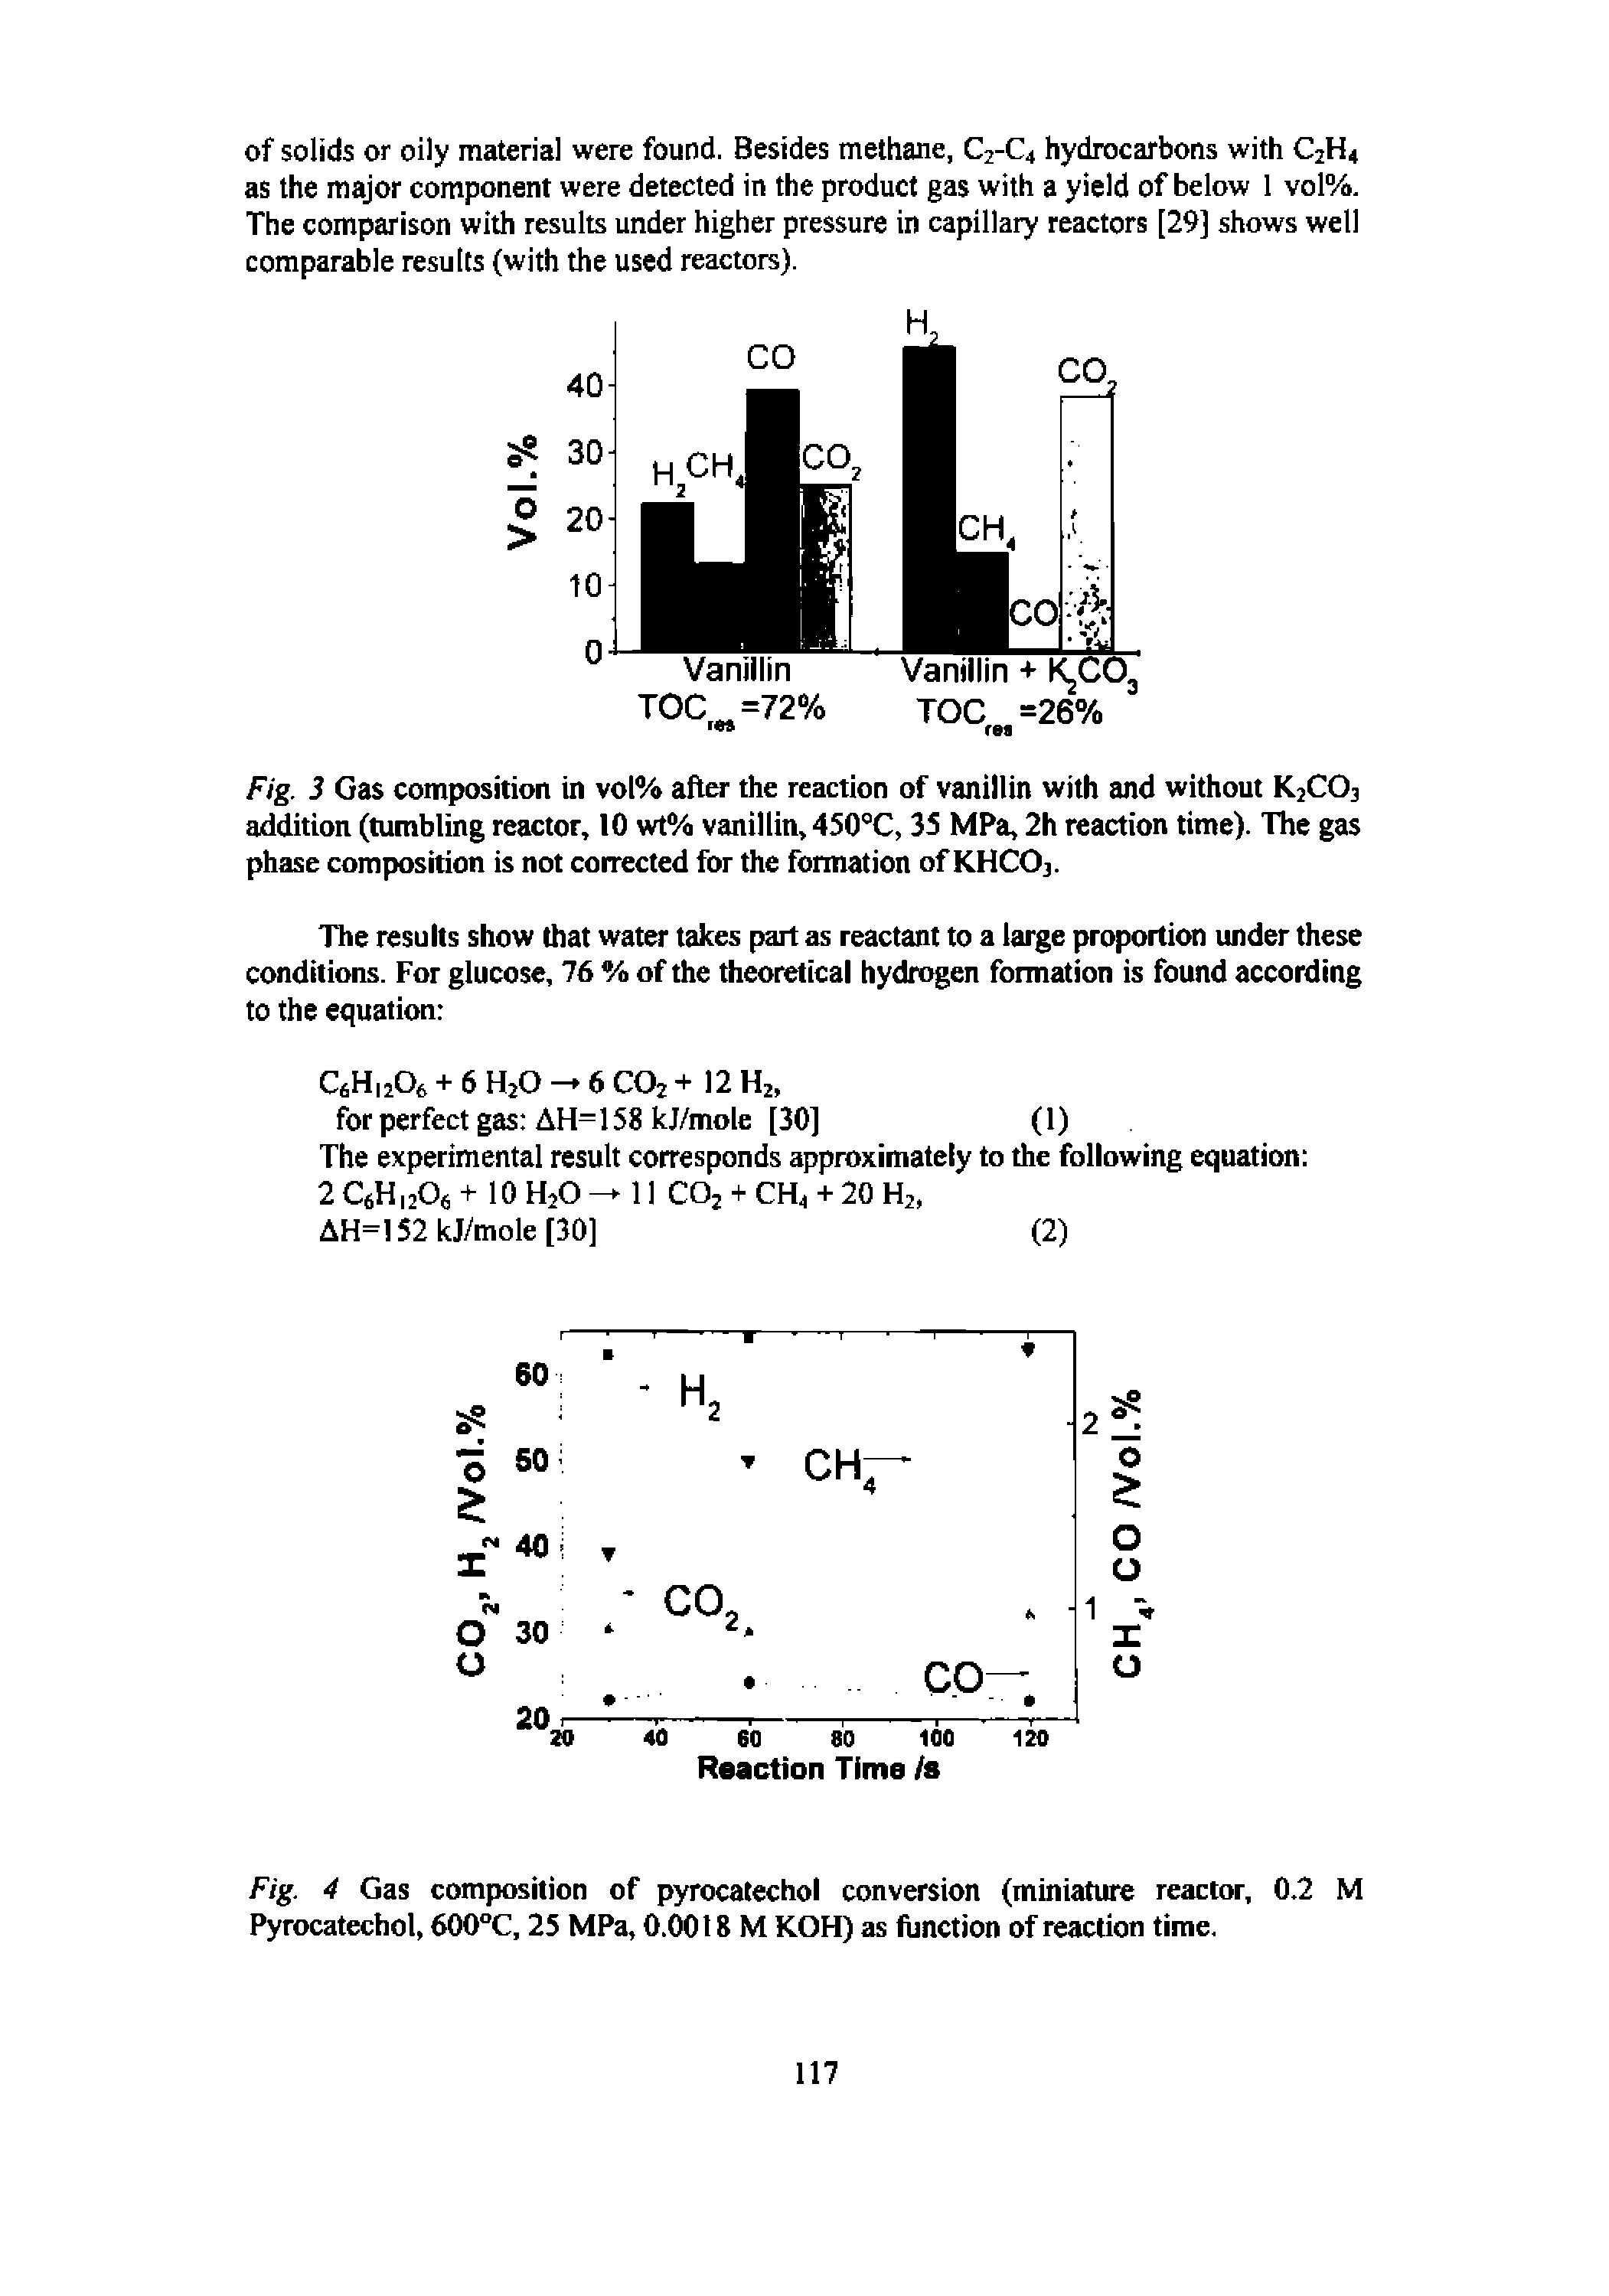 Fig. 4 Gas composition of pyrocatechol conversion (miniature reactor, 0.2 M Pyrocatechol, 600°C, 25 MPa, 0.0018 M KOH) as (unction of reaction time.